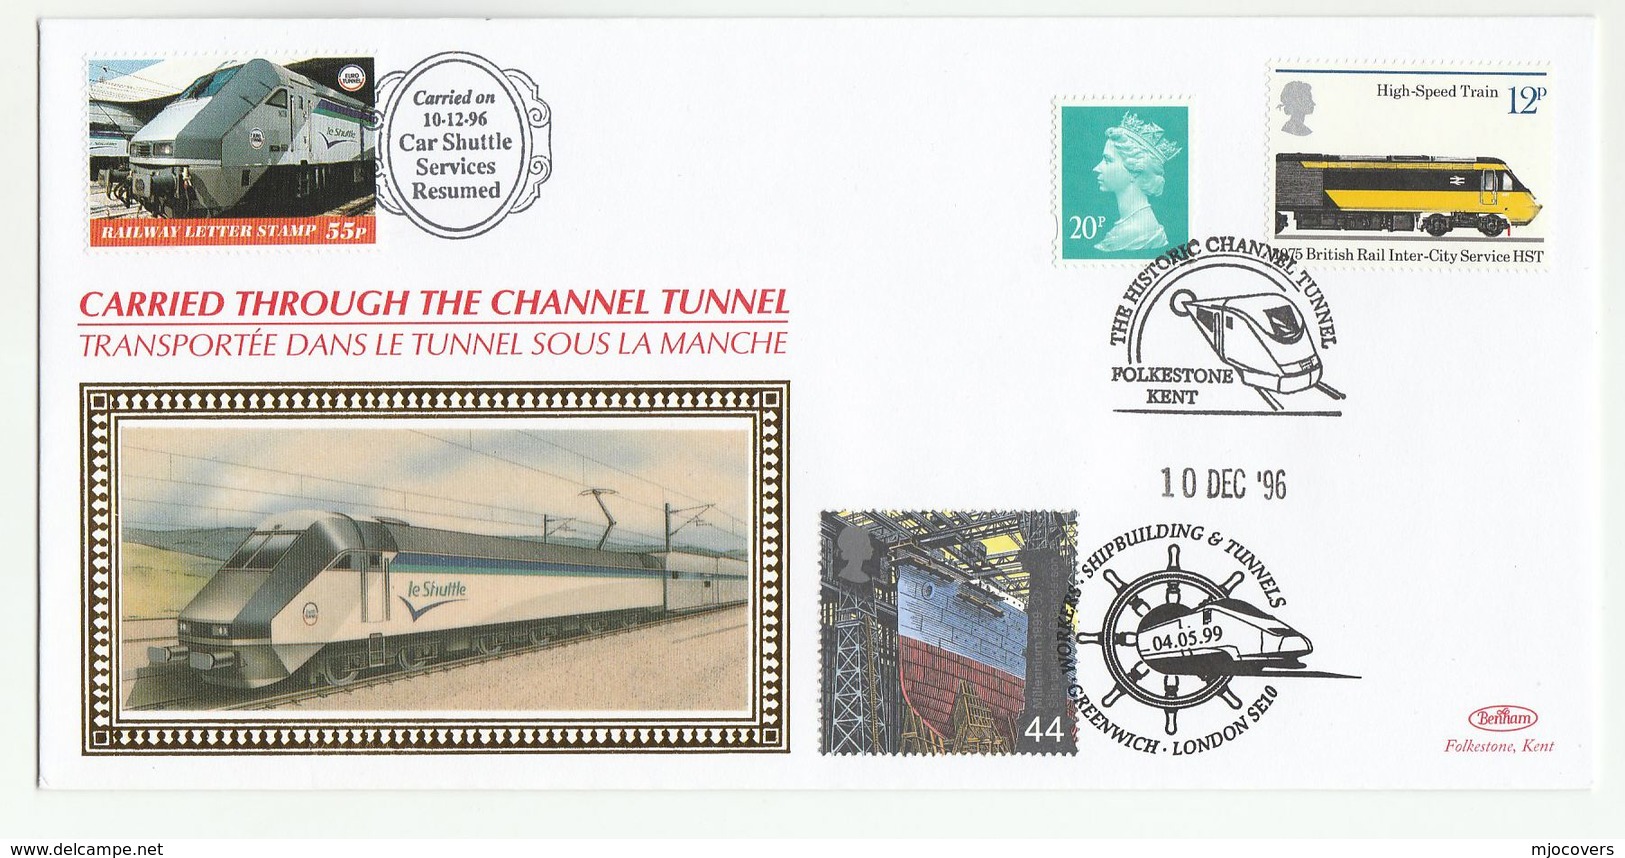 Eurostar TRAIN - 1996 Special CARRIED On CAR SHUTTLE SERVICE FOLKESTONE PARIS Fdc Millenium Stamps GB France  Cover - Trains